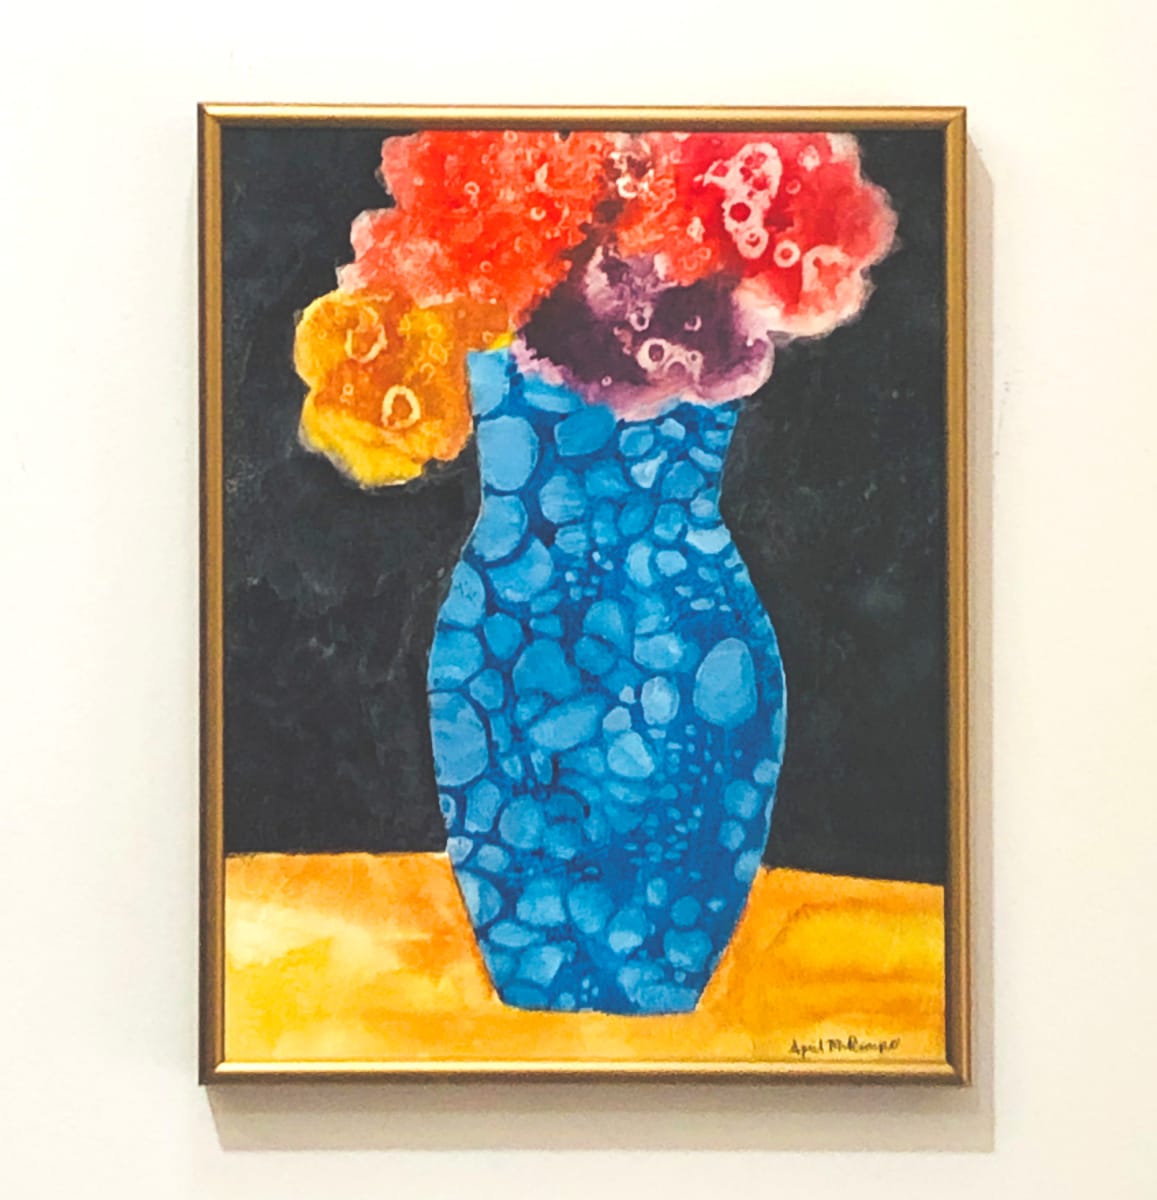 The Blue Vase by April Rimpo  Image: A fun and fanciful bouquet of flowers, framed in brushed copper frame. 